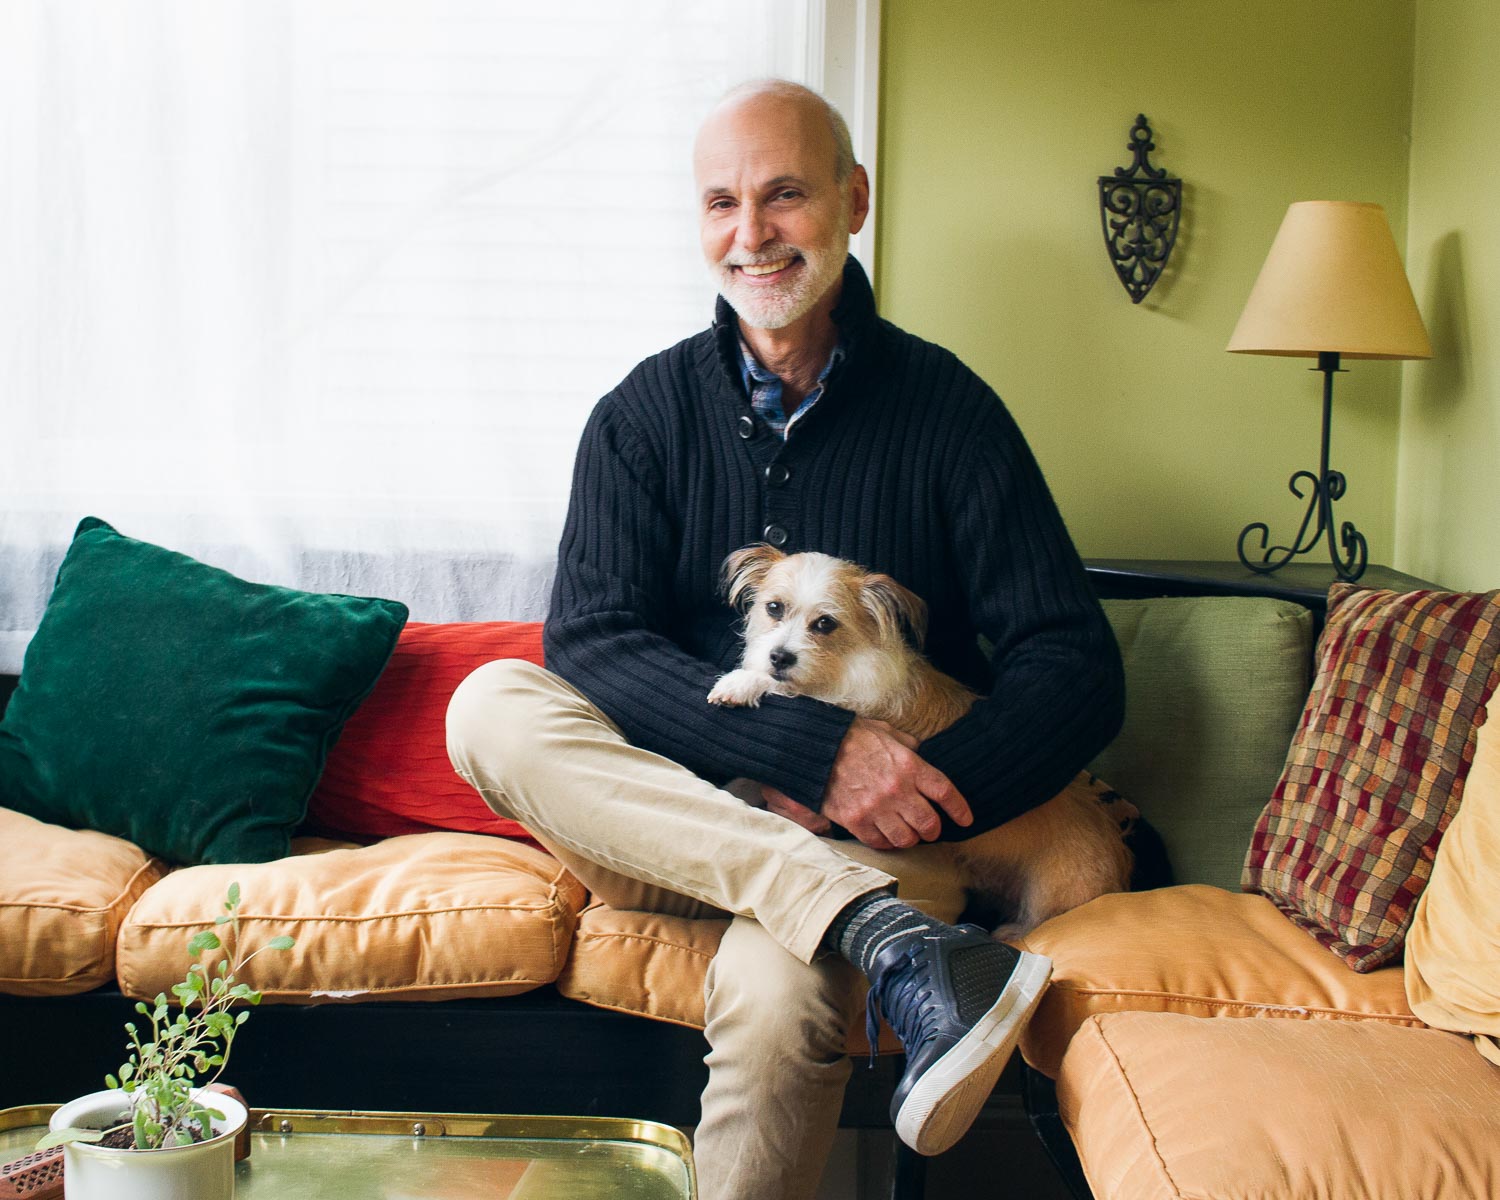 Portrait of Dave Cesana sitting on couch with dog